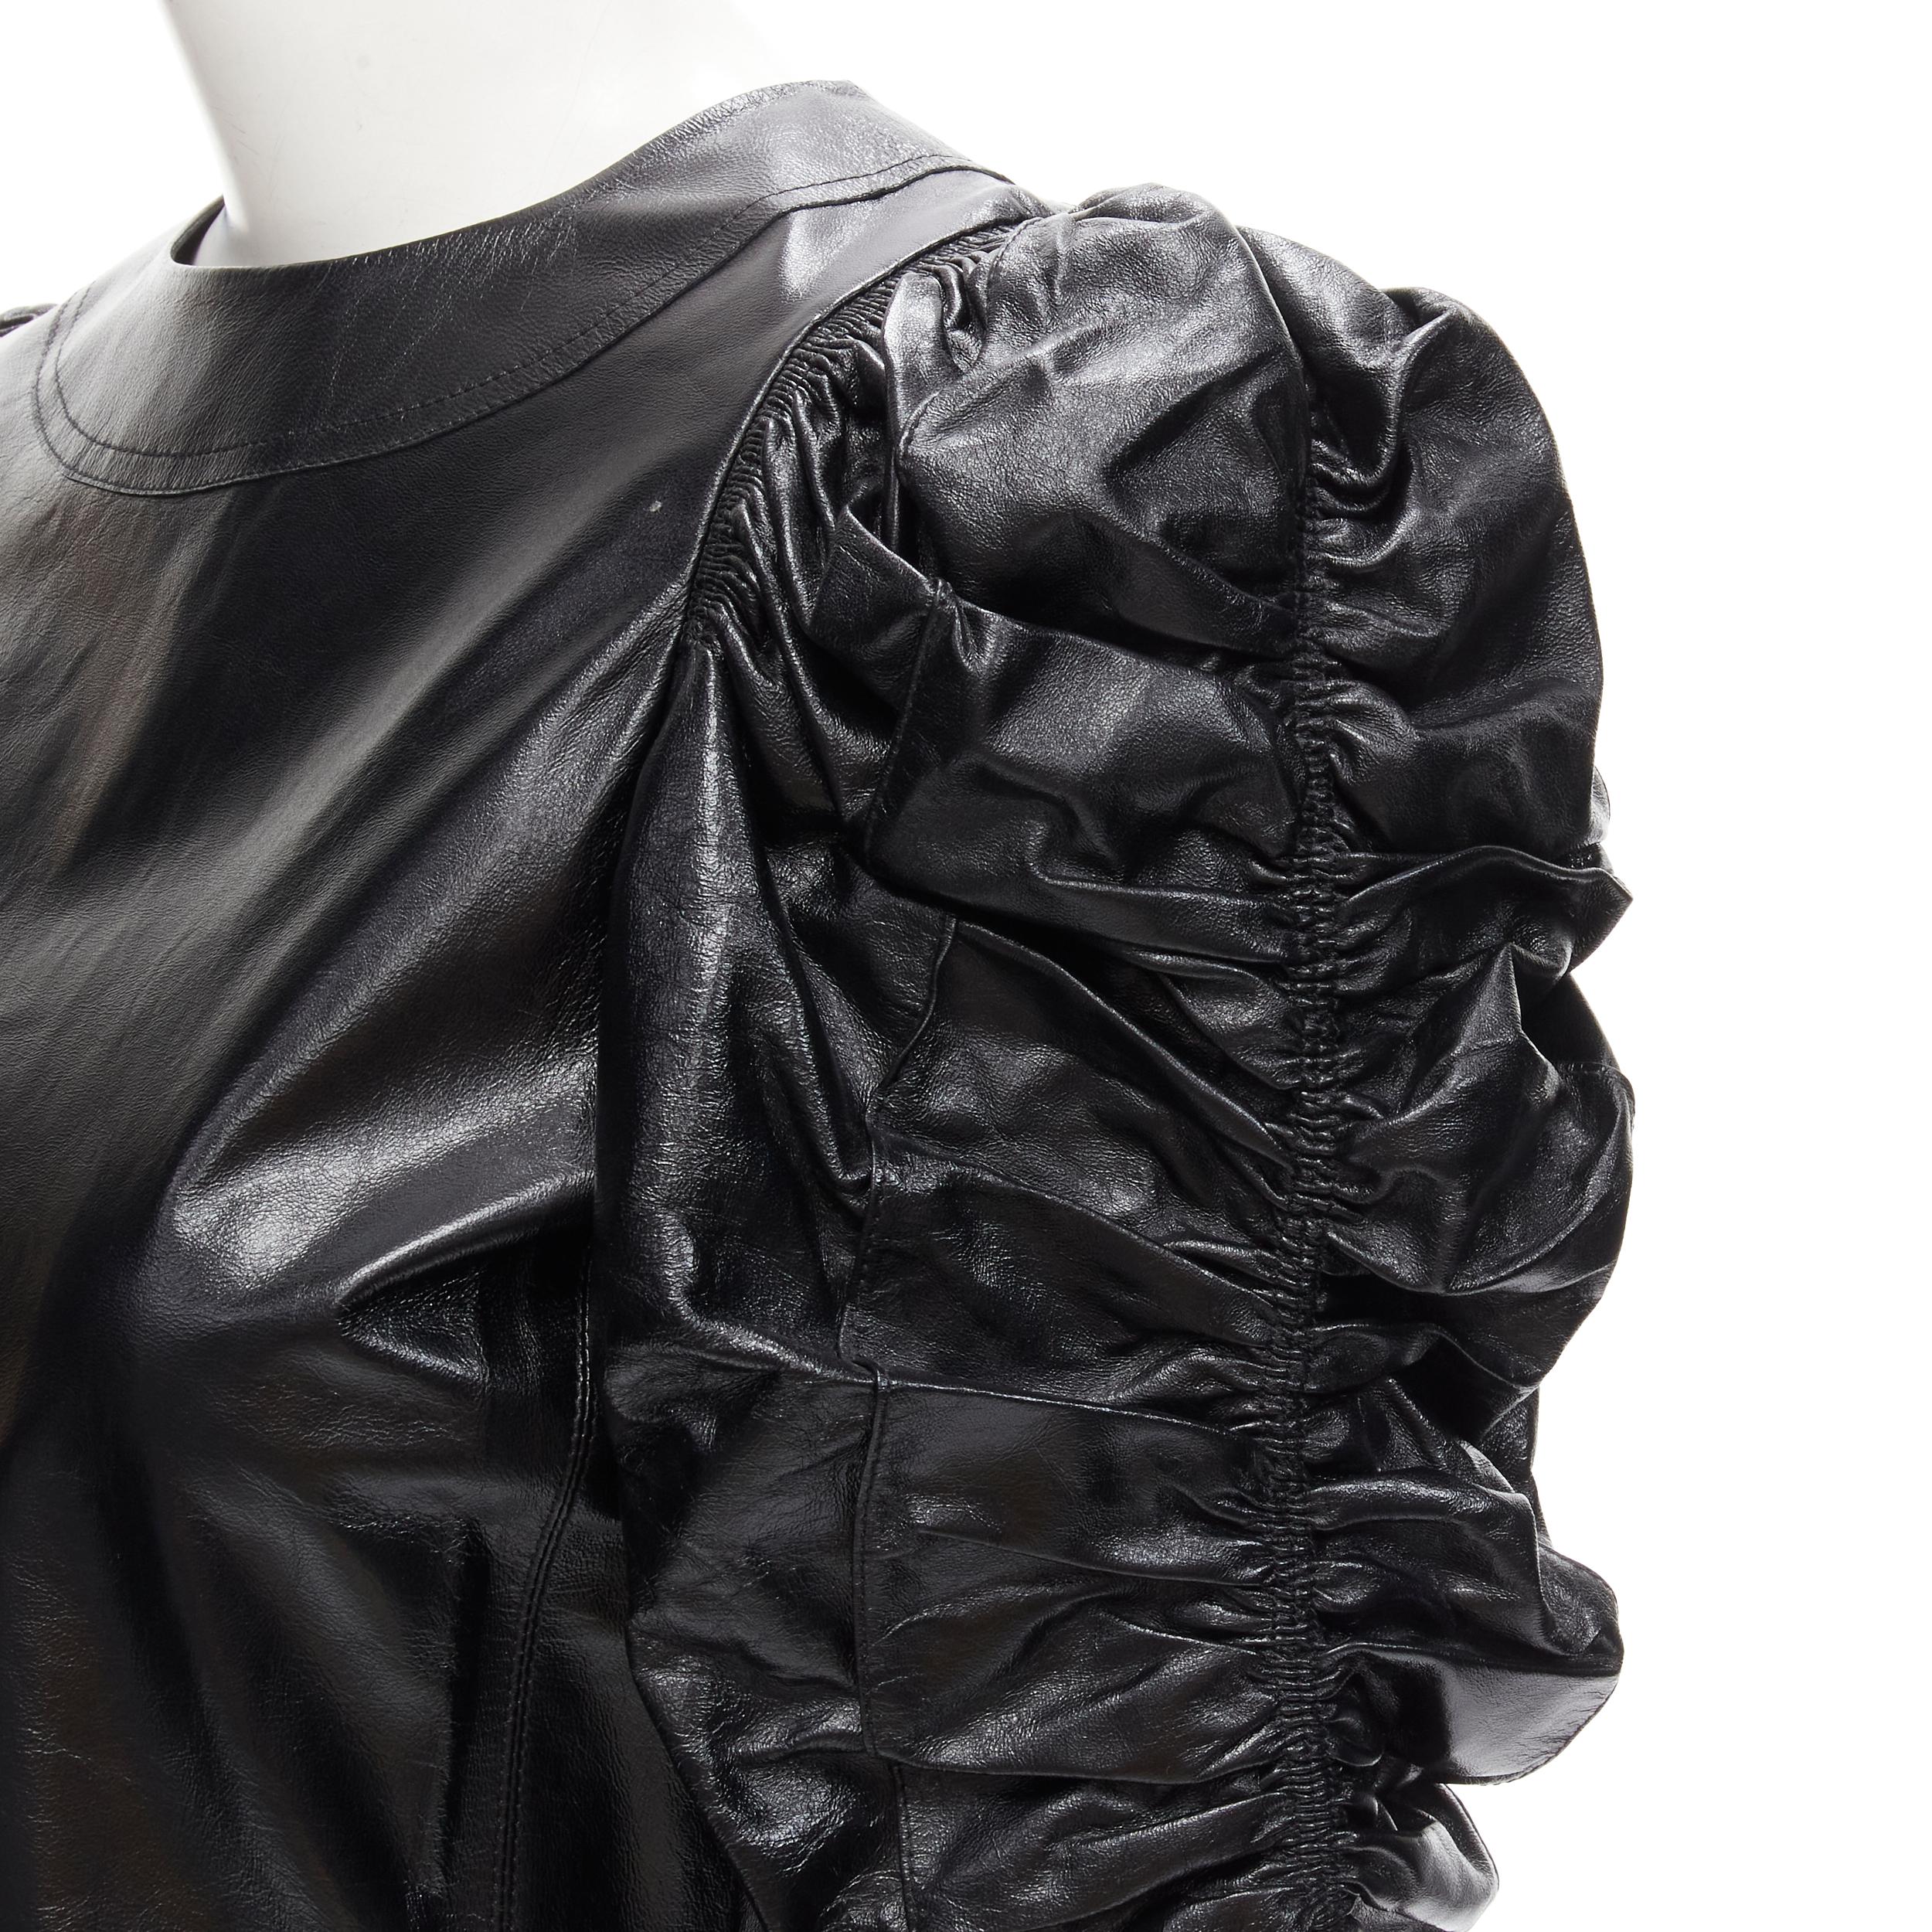 rare OLD CELINE Phoebe Philo black shiney lambskin rusched sleeve dress FR36 S For Sale 1